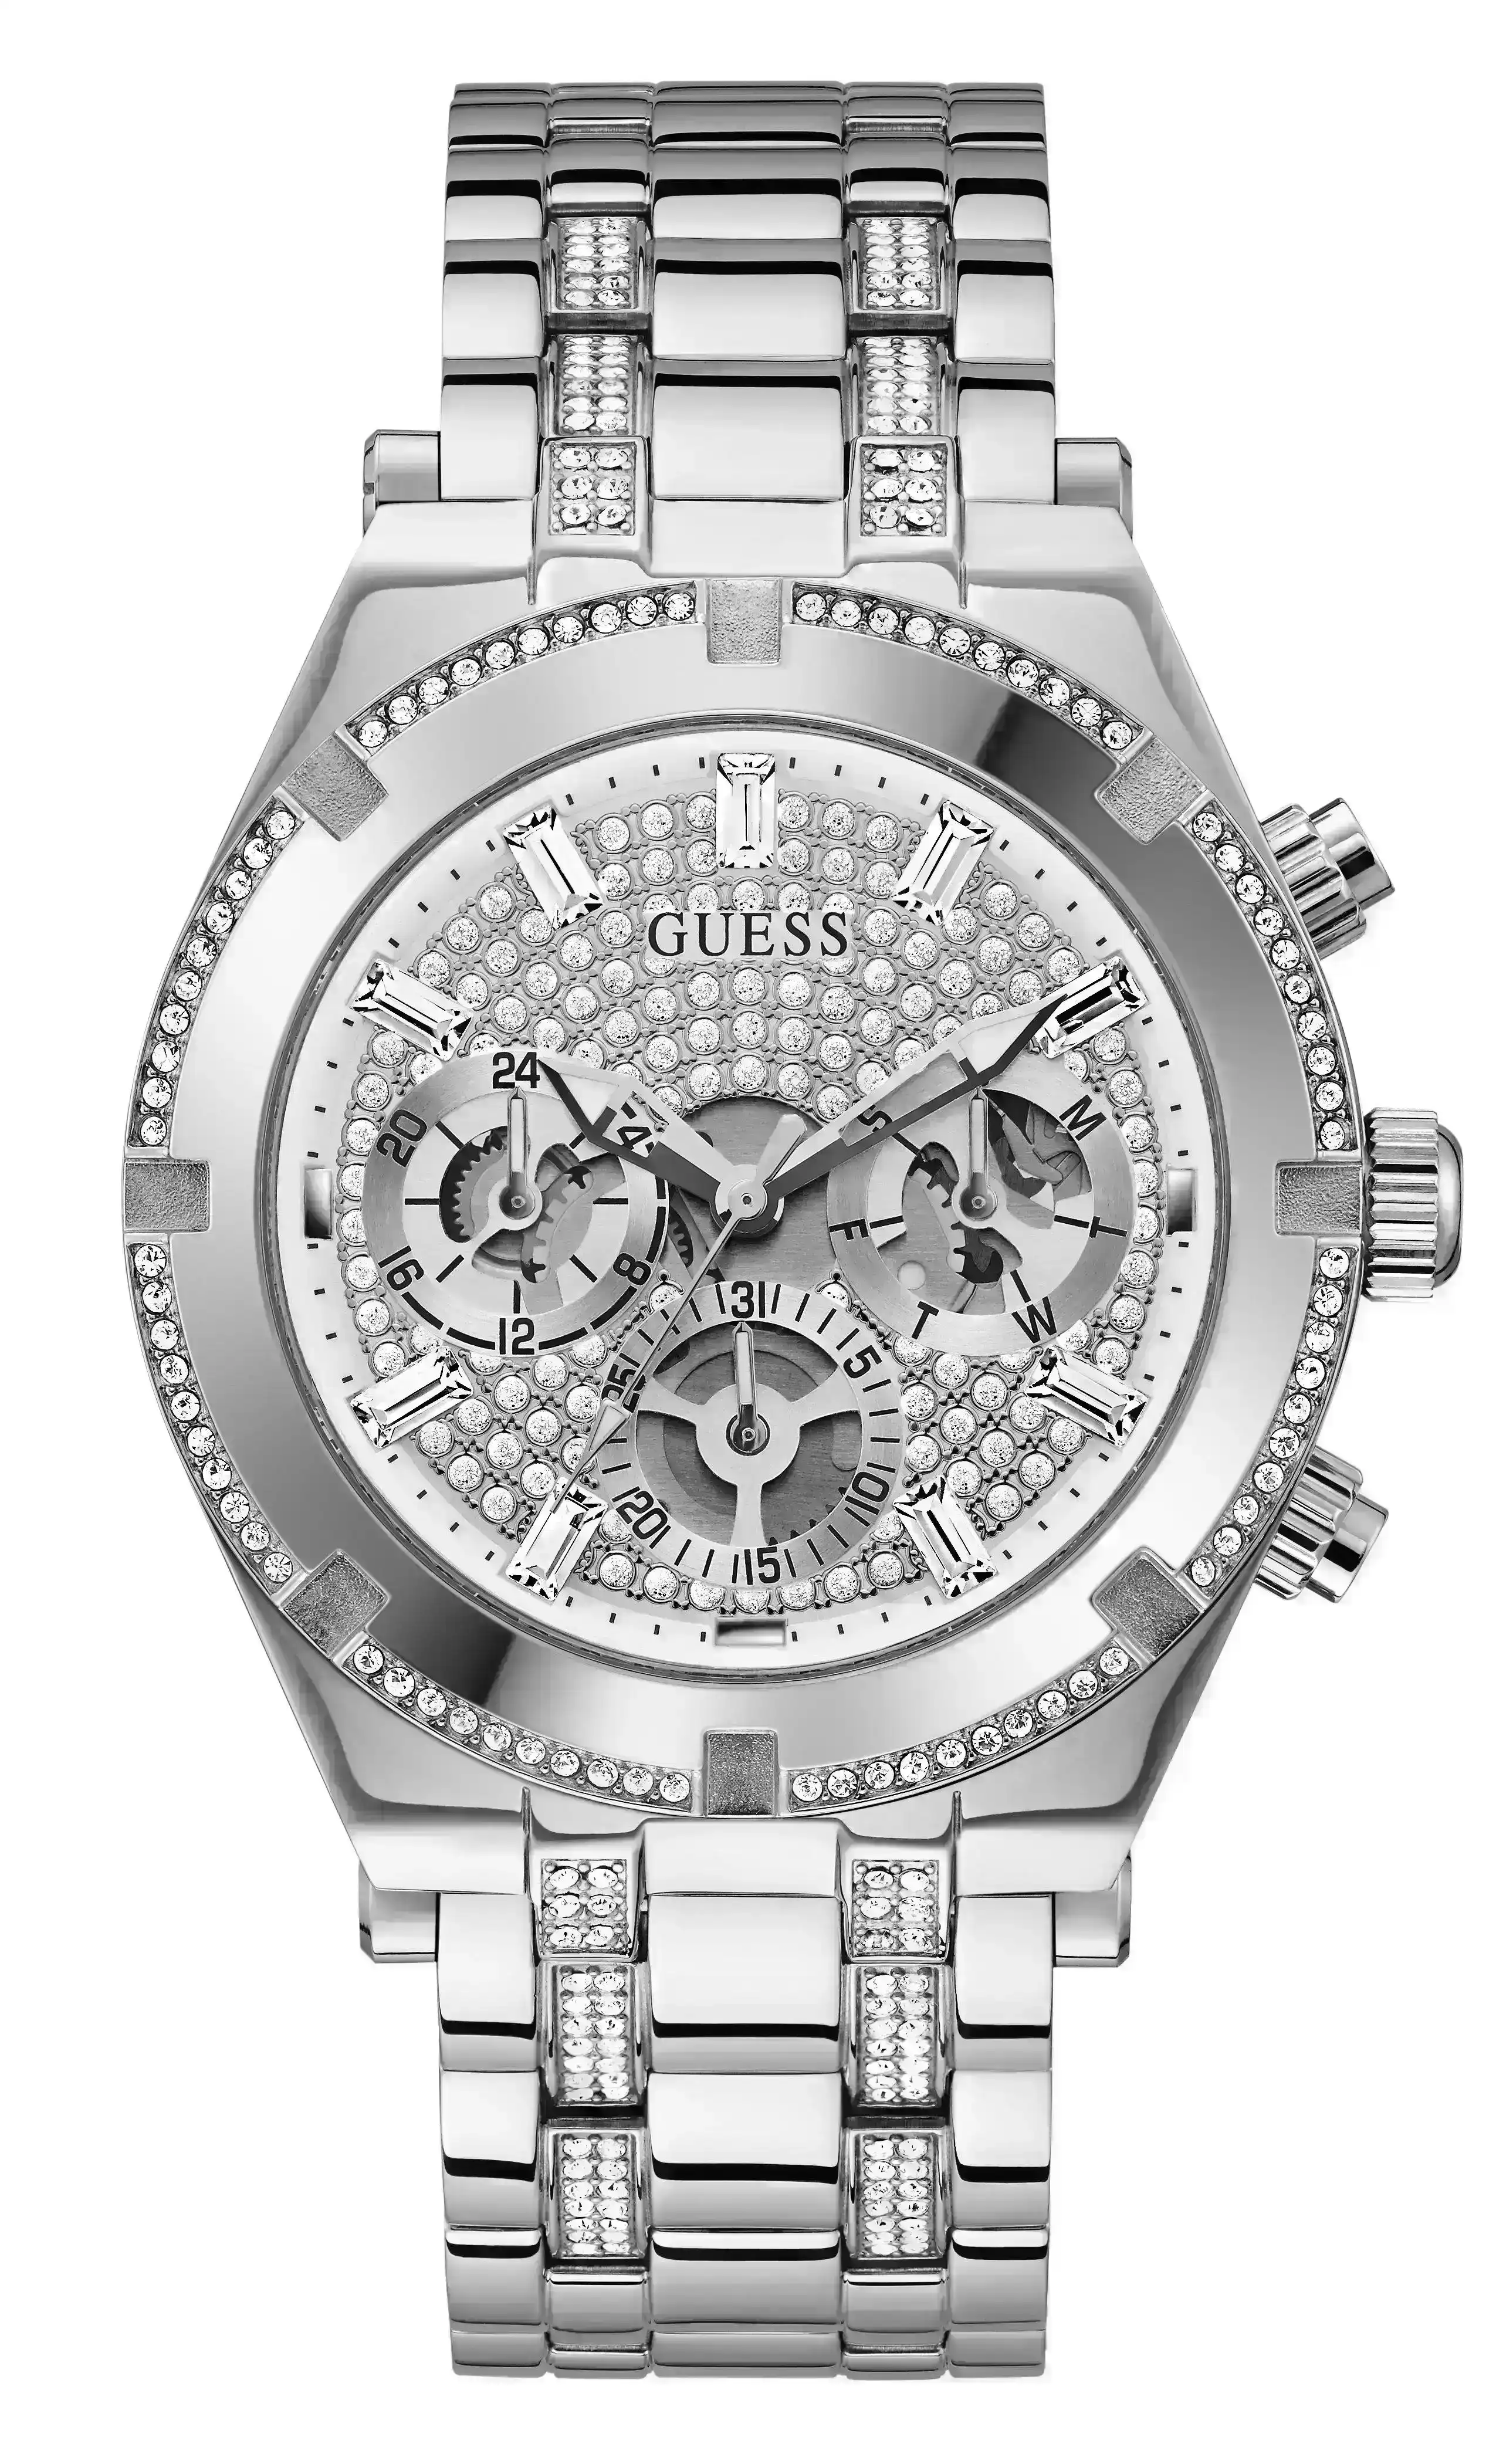 Guess Continental Silver and Crystal Men's Watch GW0261G1